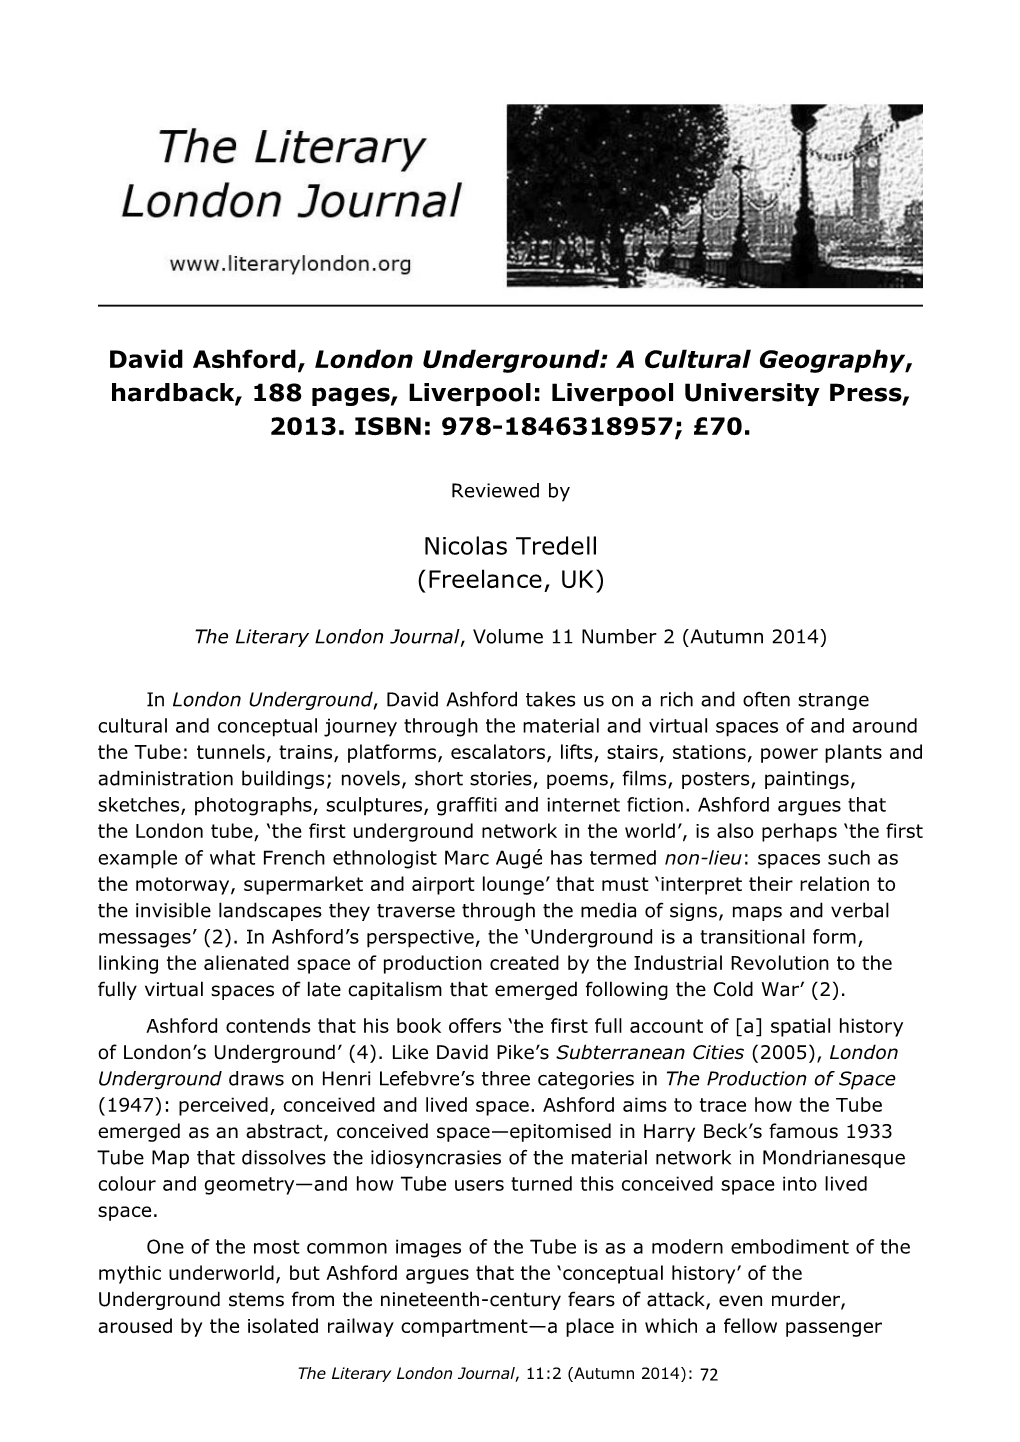 Review of David Ashford, London Underground: a Cultural Geography